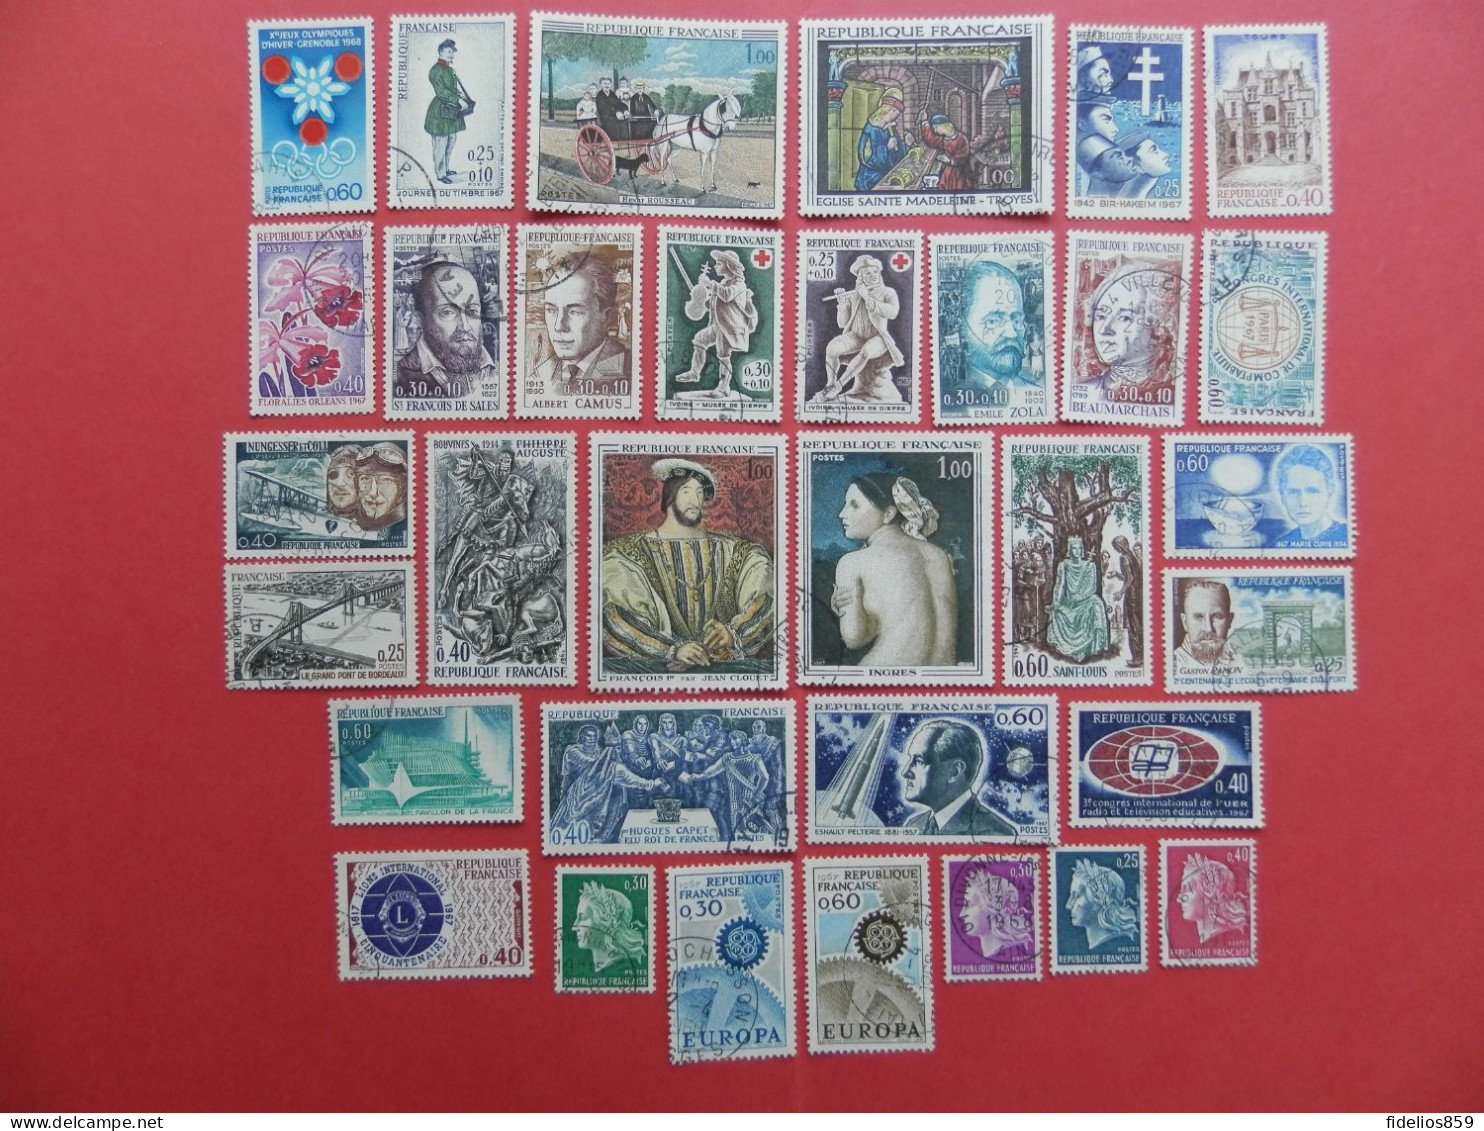 FRANCE : ANNEE COMPLETE 1967 SOIT 33TIMBRES OBLITERES QUALITE LUXE (VOIR PHOTOS) - 1960-1969